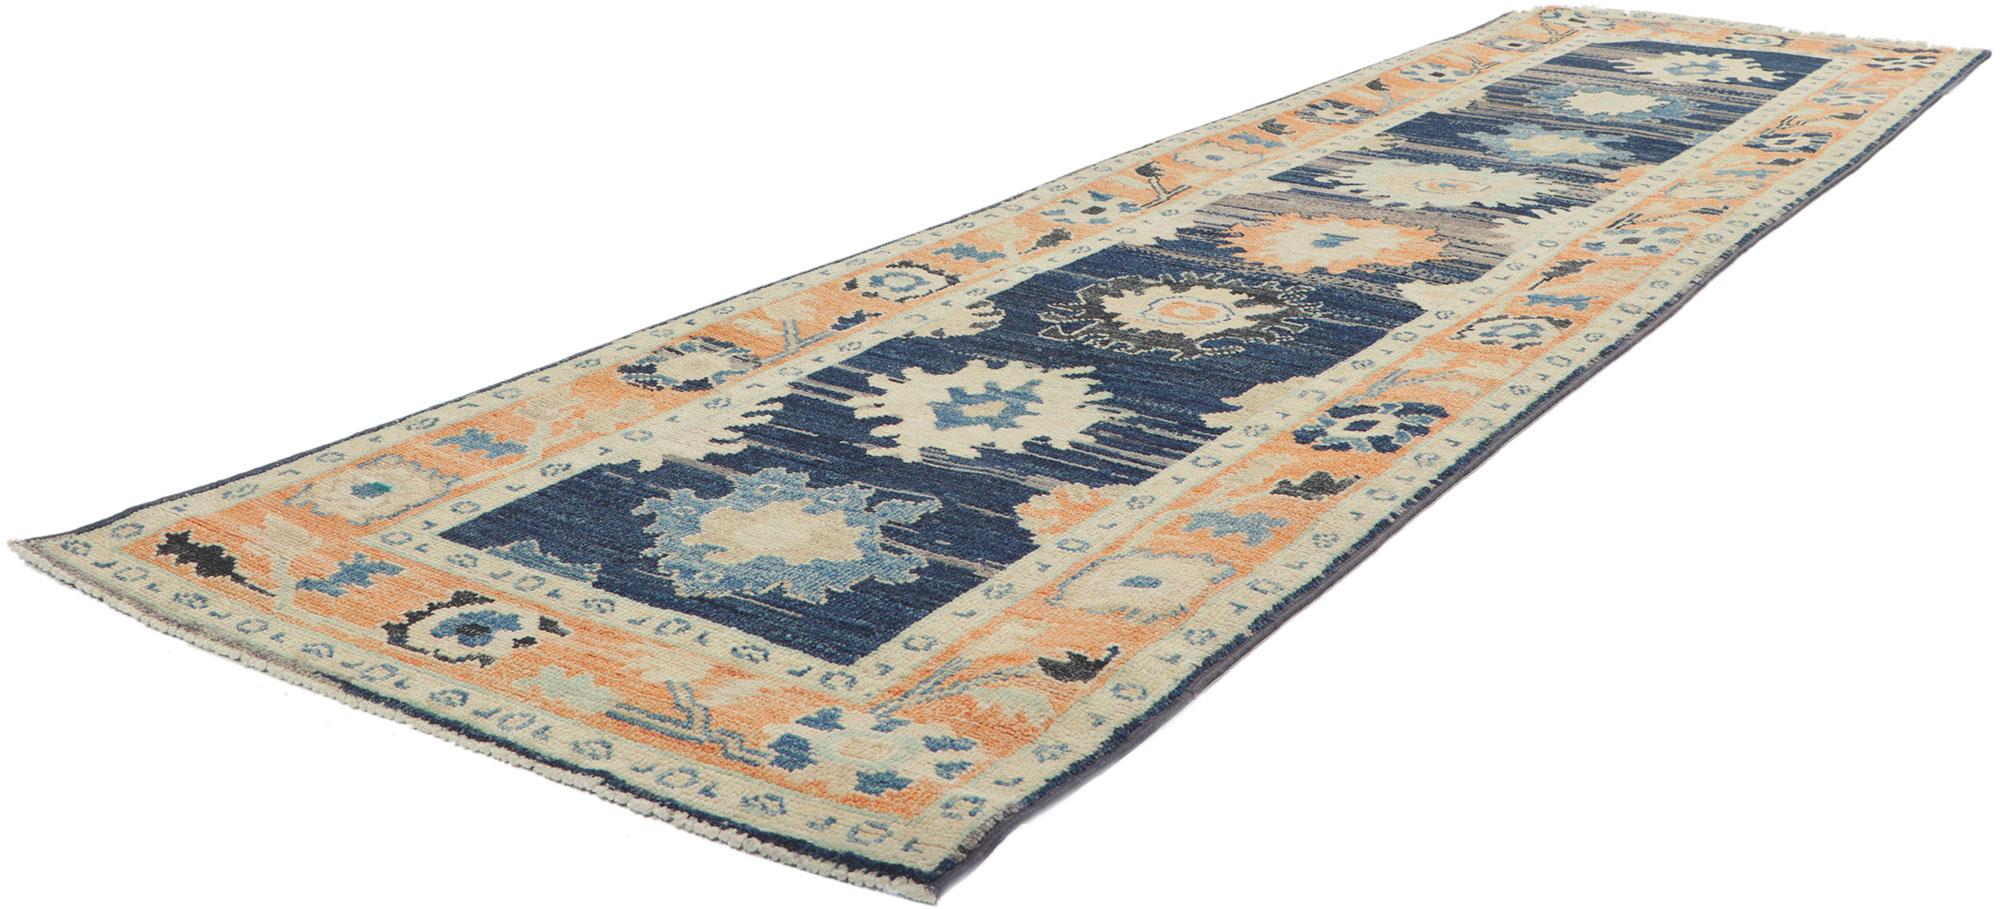 80830 new colorful Oushak runner, 02'05 x 09'04.
With its modern style, incredible detail and texture, this hand knotted wool colorful Oushak runner is a captivating vision of woven beauty. The eye-catching geometric design and lively colors woven